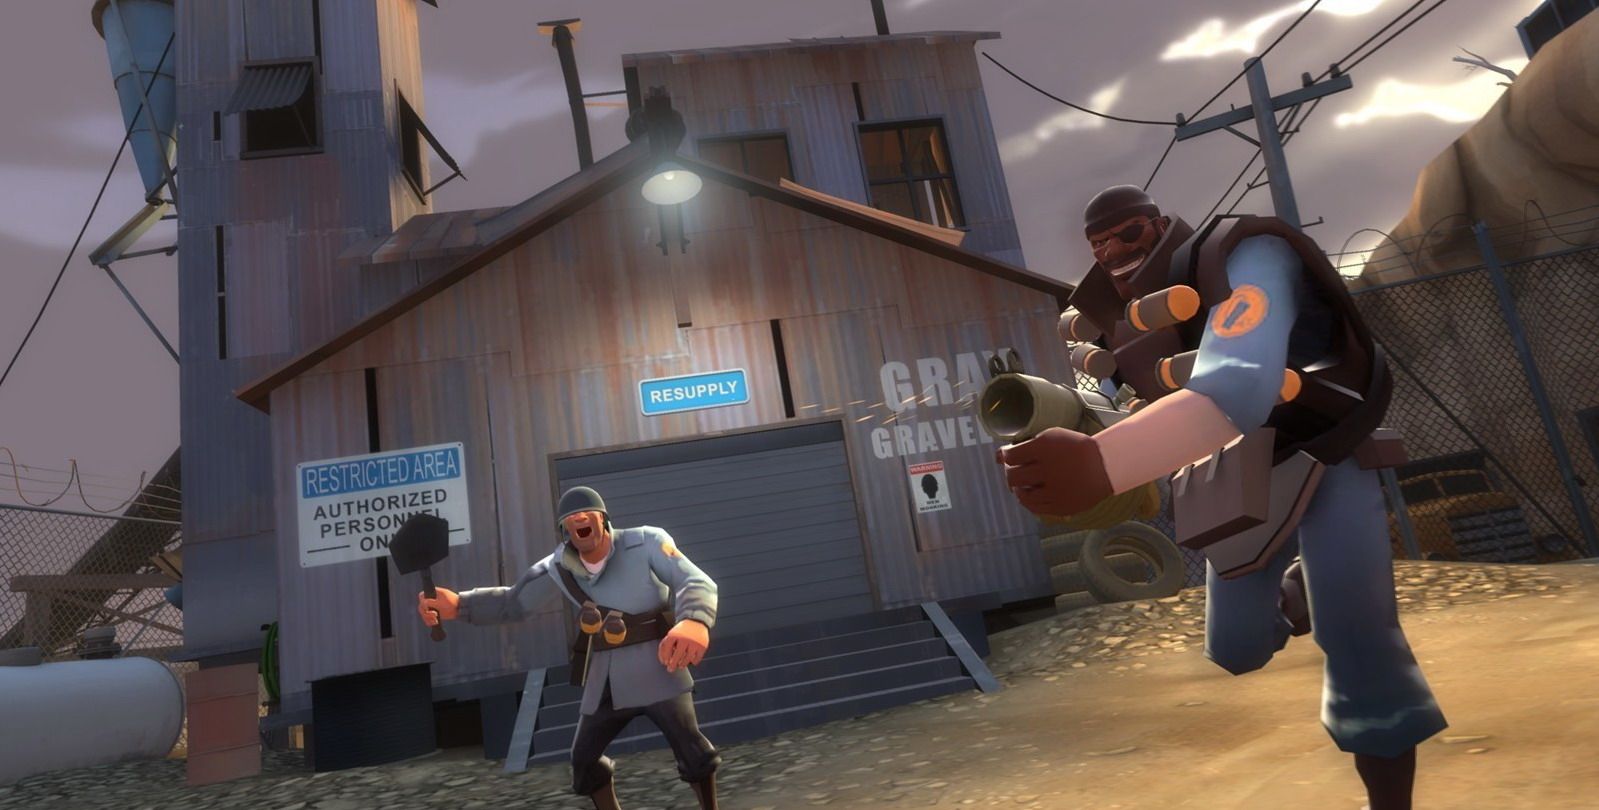 Team fortress 2 image 7